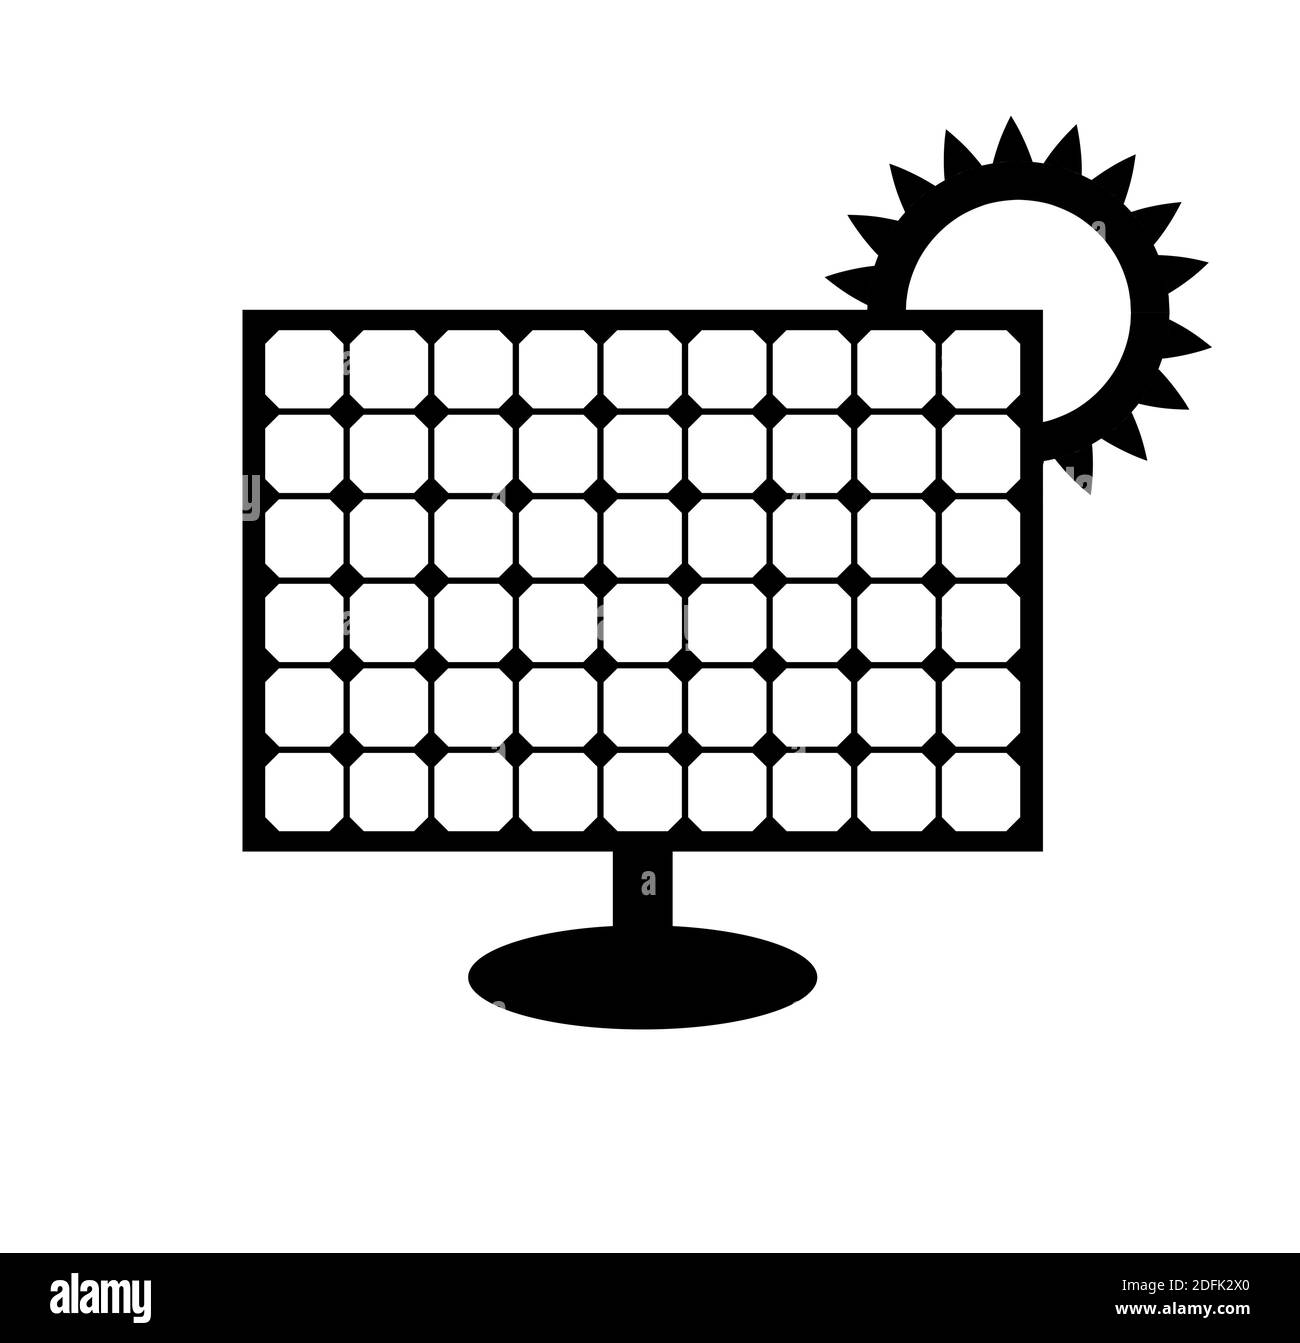 Solar panel icon isolated on white background. Vector symbol of alternative energy source. Black pictogram with renewable power resource with sun. Eco Stock Vector